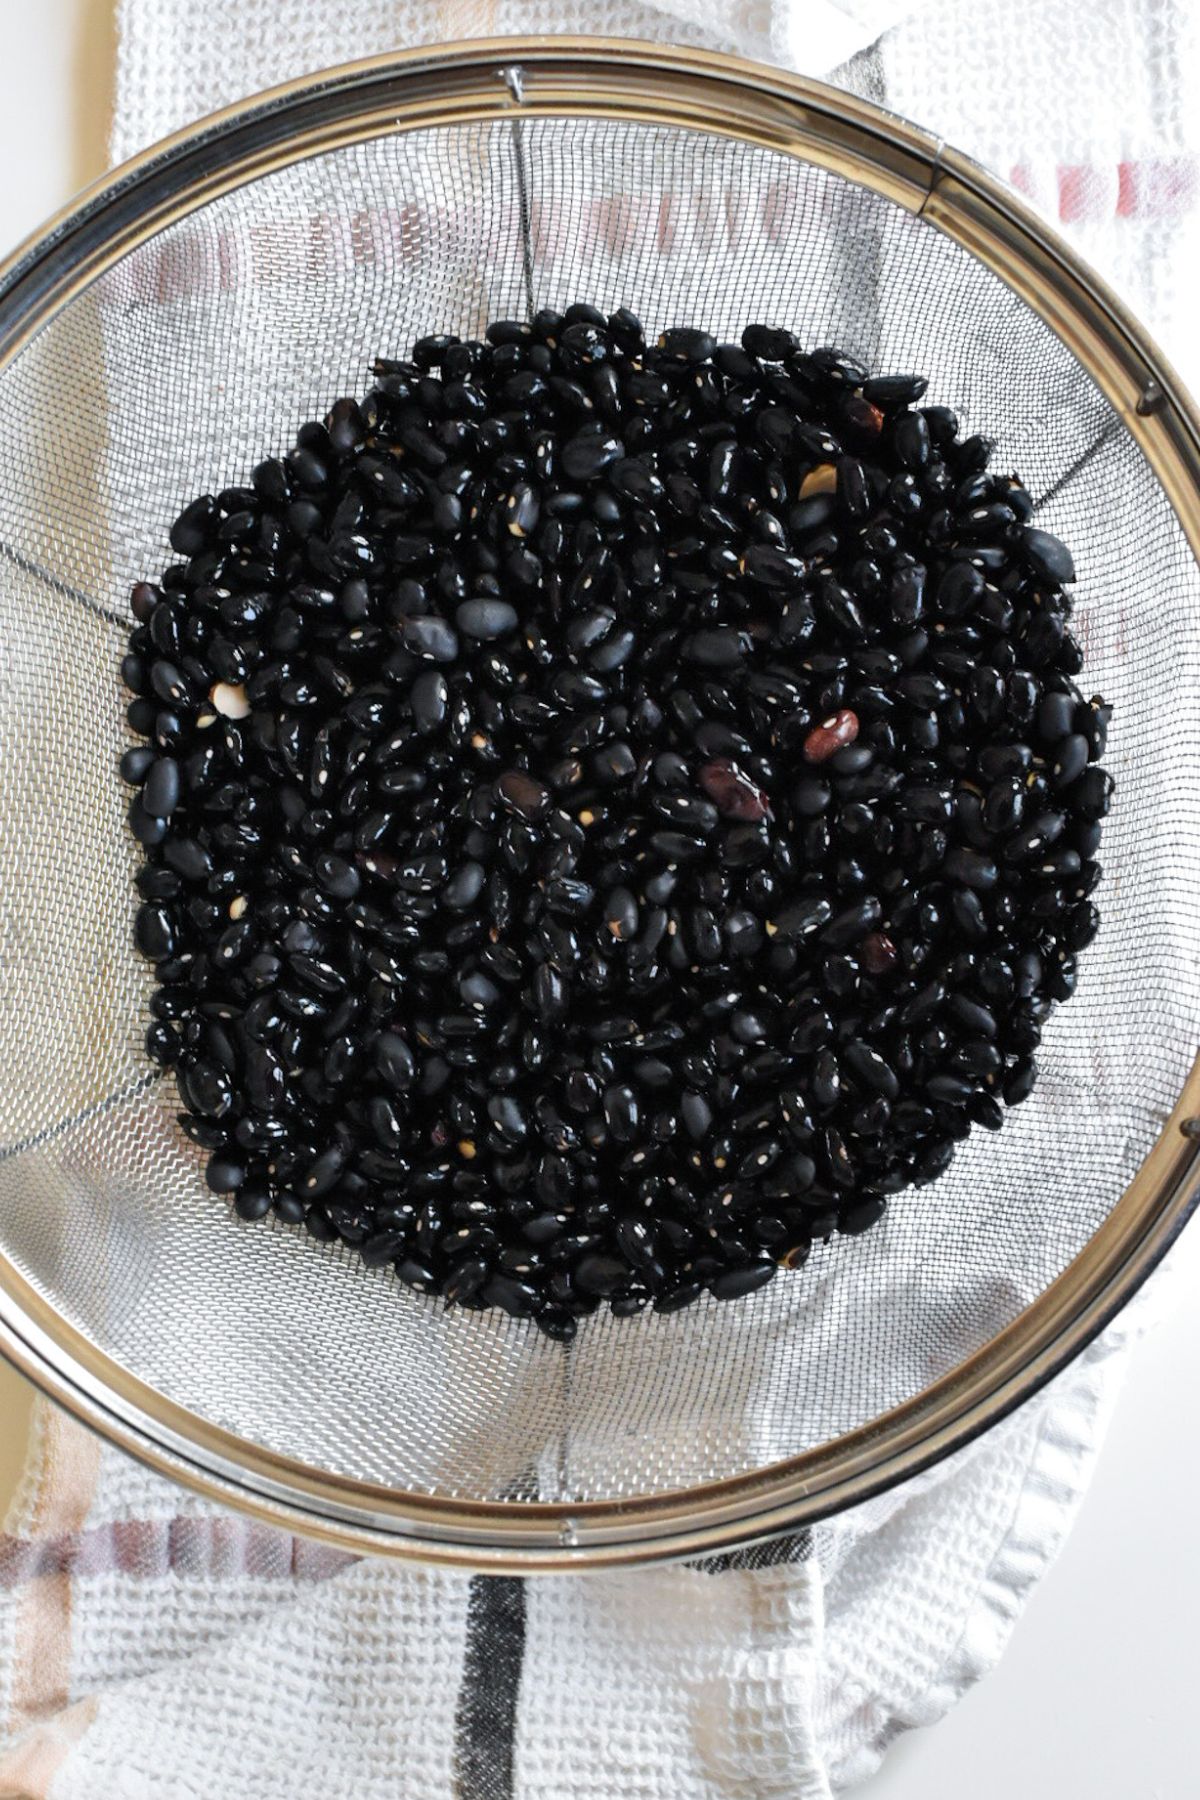 Rinsed dried black beans in a colander.